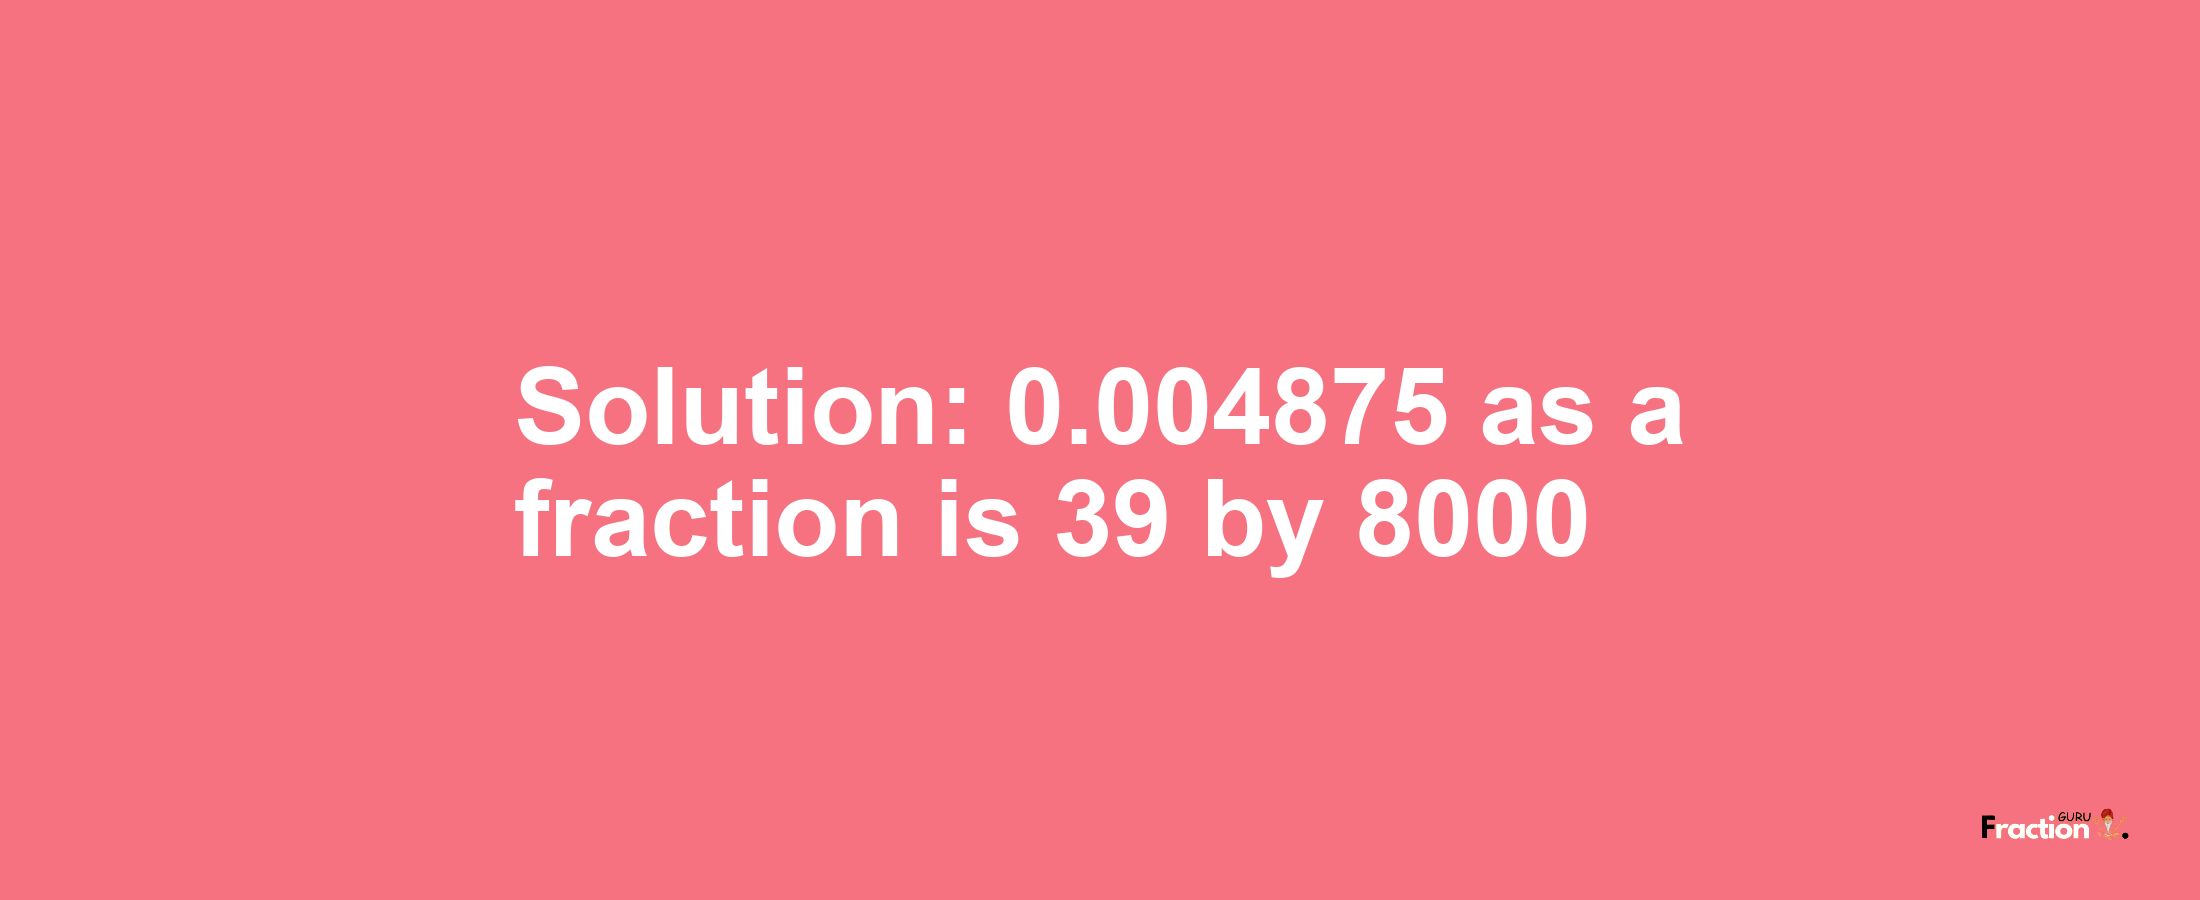 Solution:0.004875 as a fraction is 39/8000